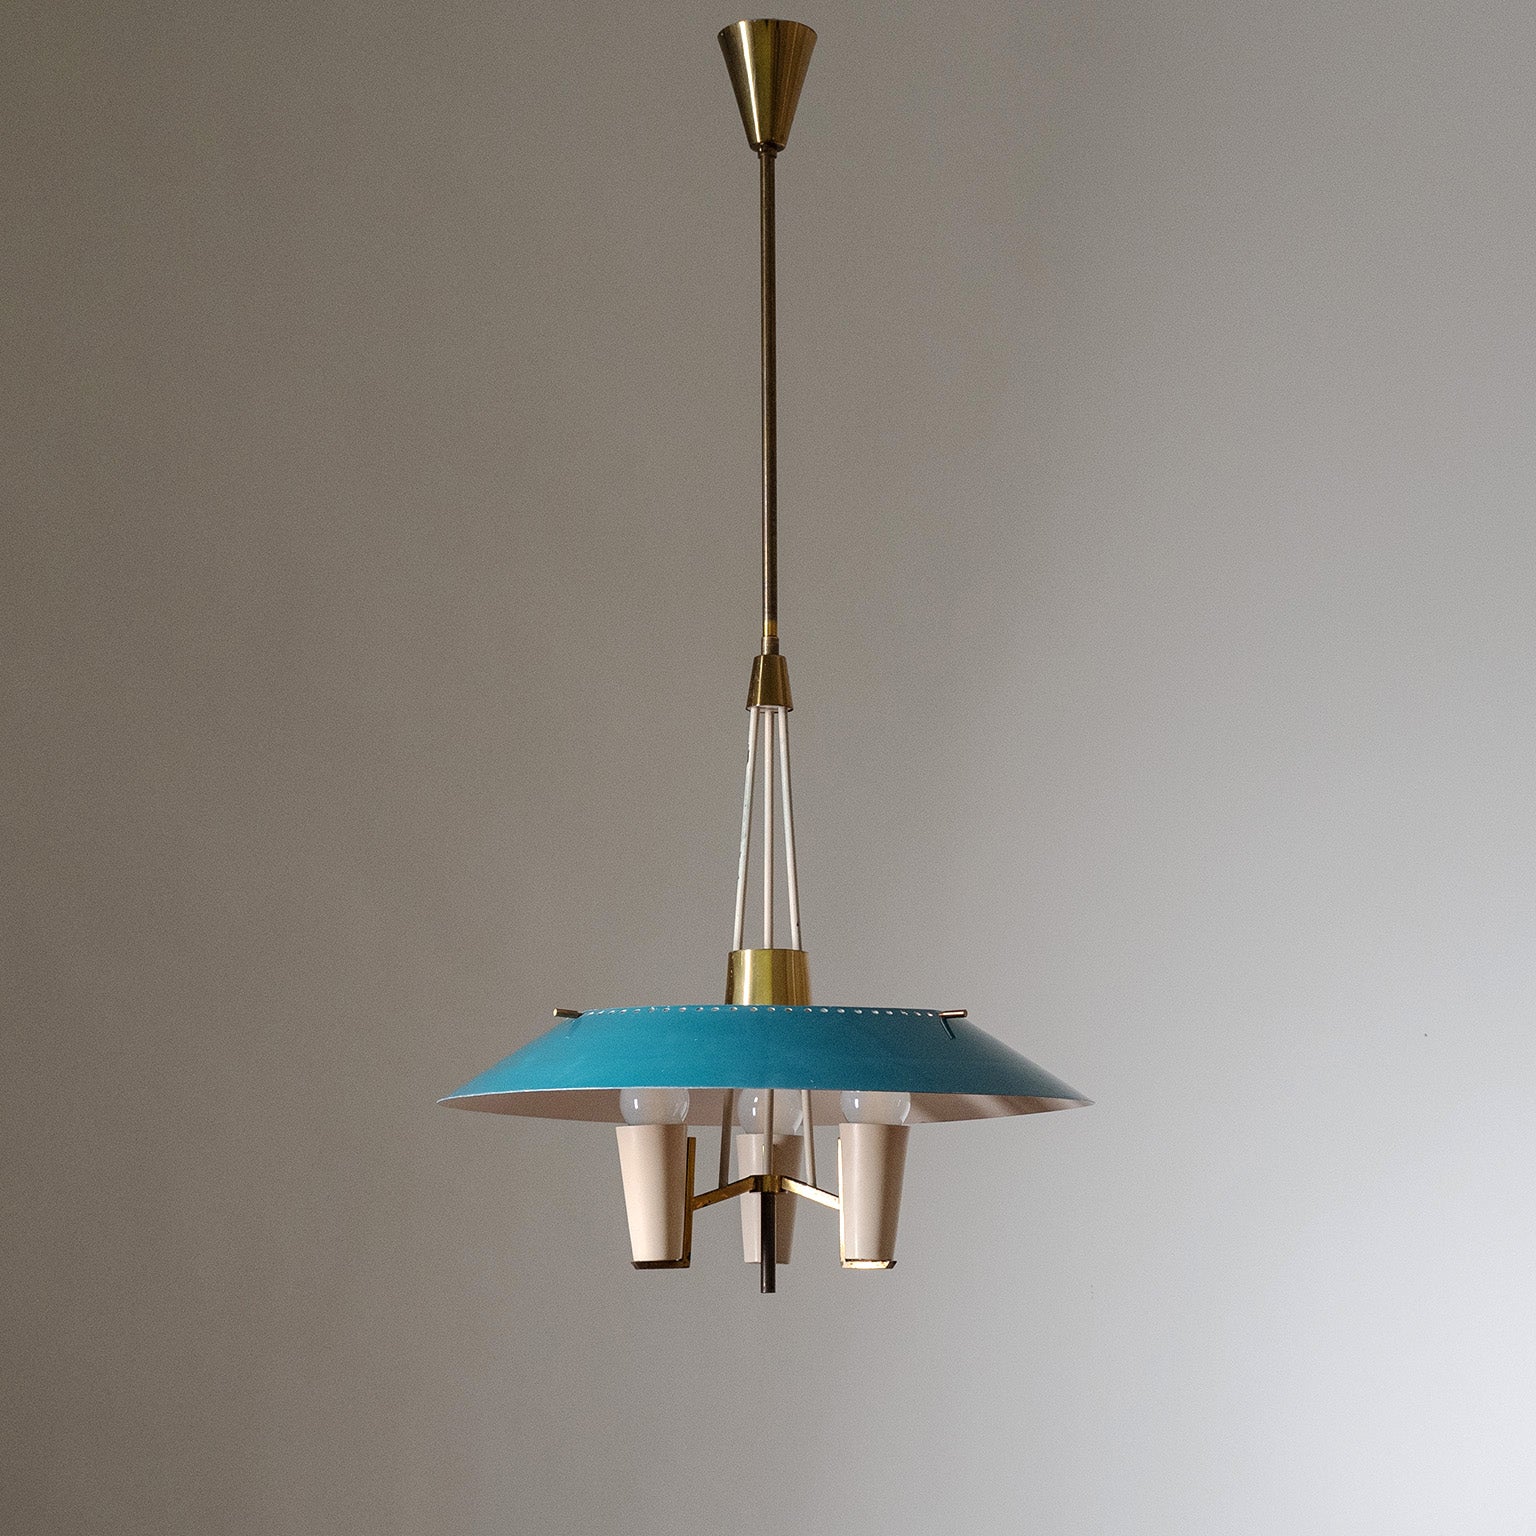 Rare modernist Italian chandelier/lantern from the 1950s. Sculptural brass structure with a large lacquered aluminum shade. Nice condition with patina on the brass and some light wear to the original lacquer. Three original brass E14 sockets with